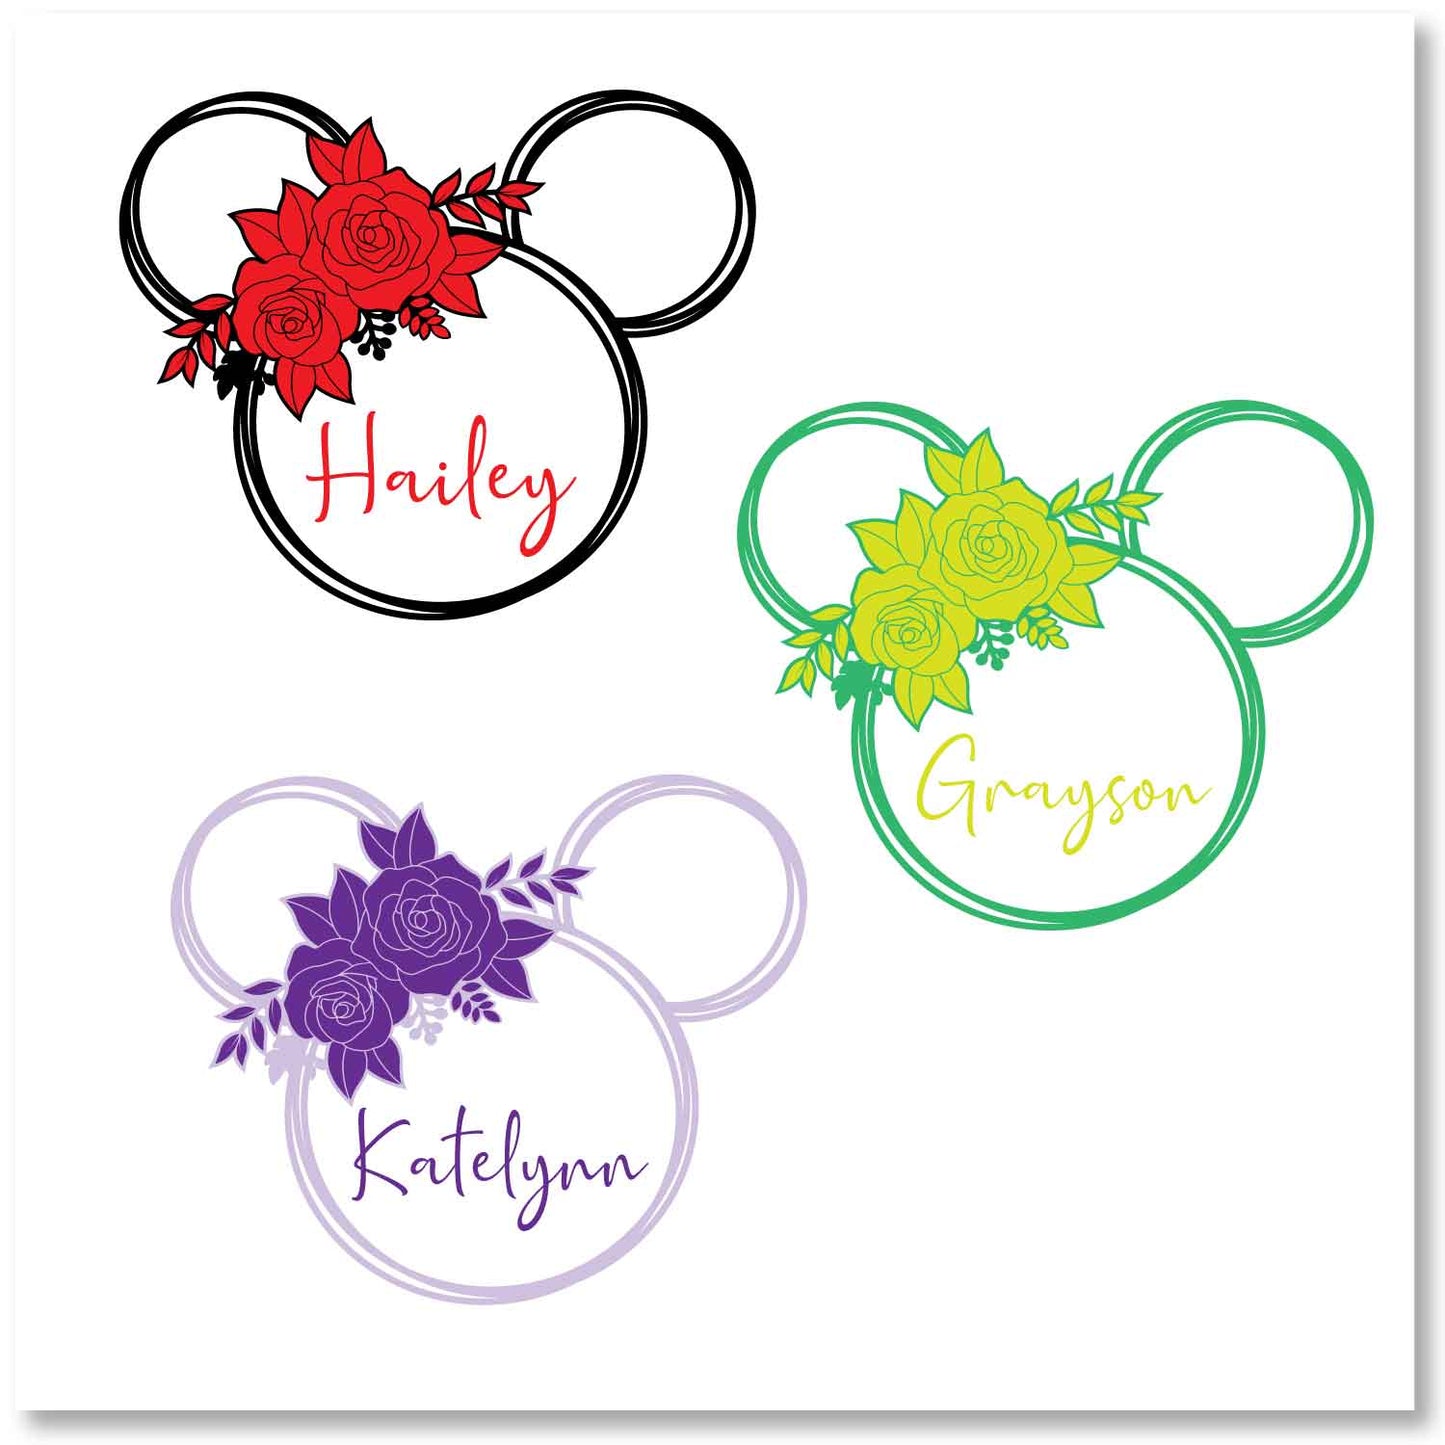 Mouse with Flower and Personalized Name Vinyl Wall Decal Monogram Nursery Kids Room